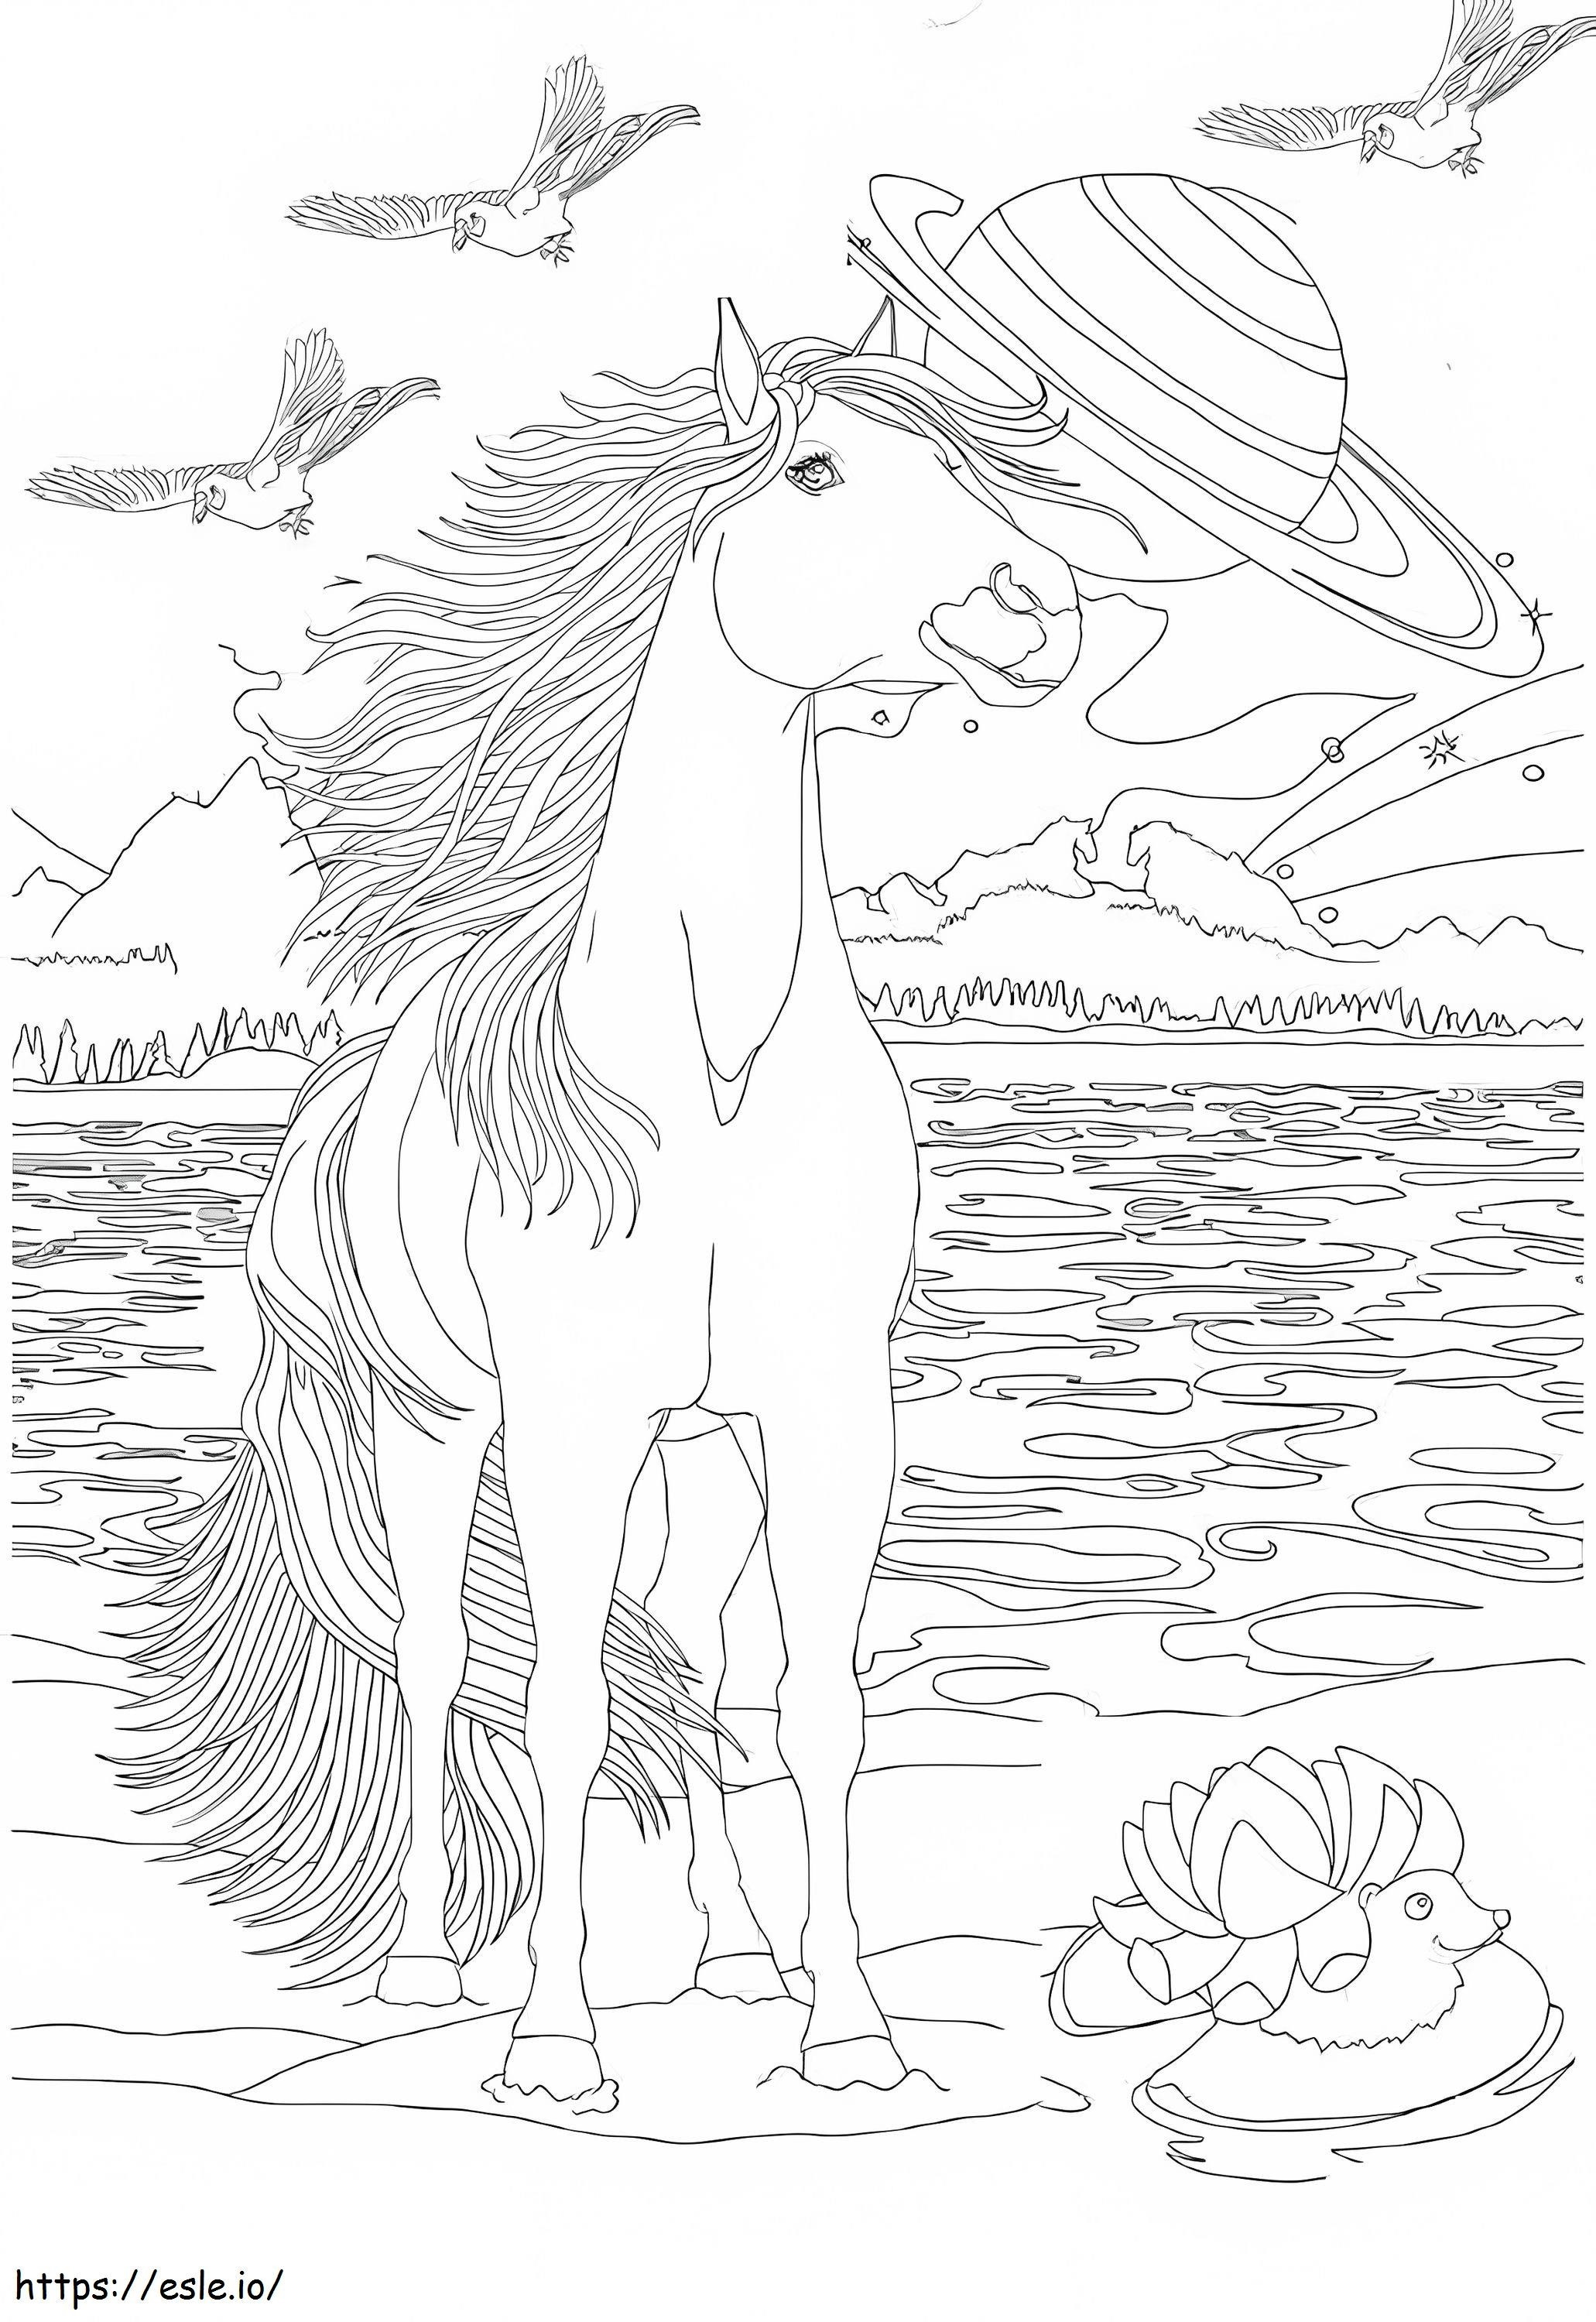 Beauty On The Beach coloring page